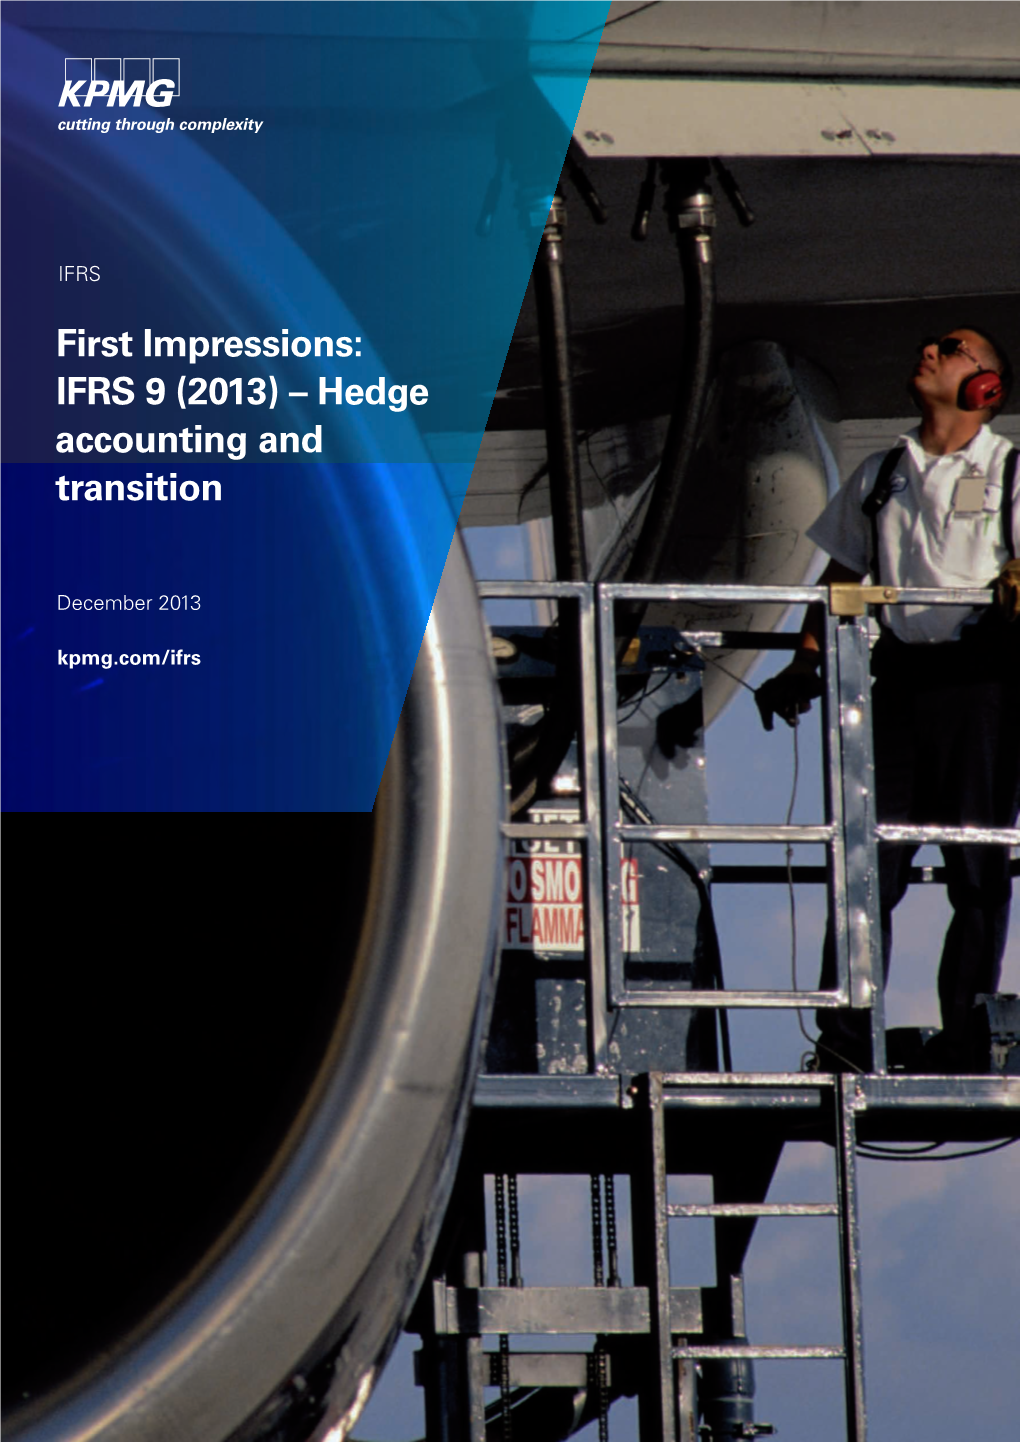 First Impressions: IFRS 9 (2013) – Hedge Accounting and Transition